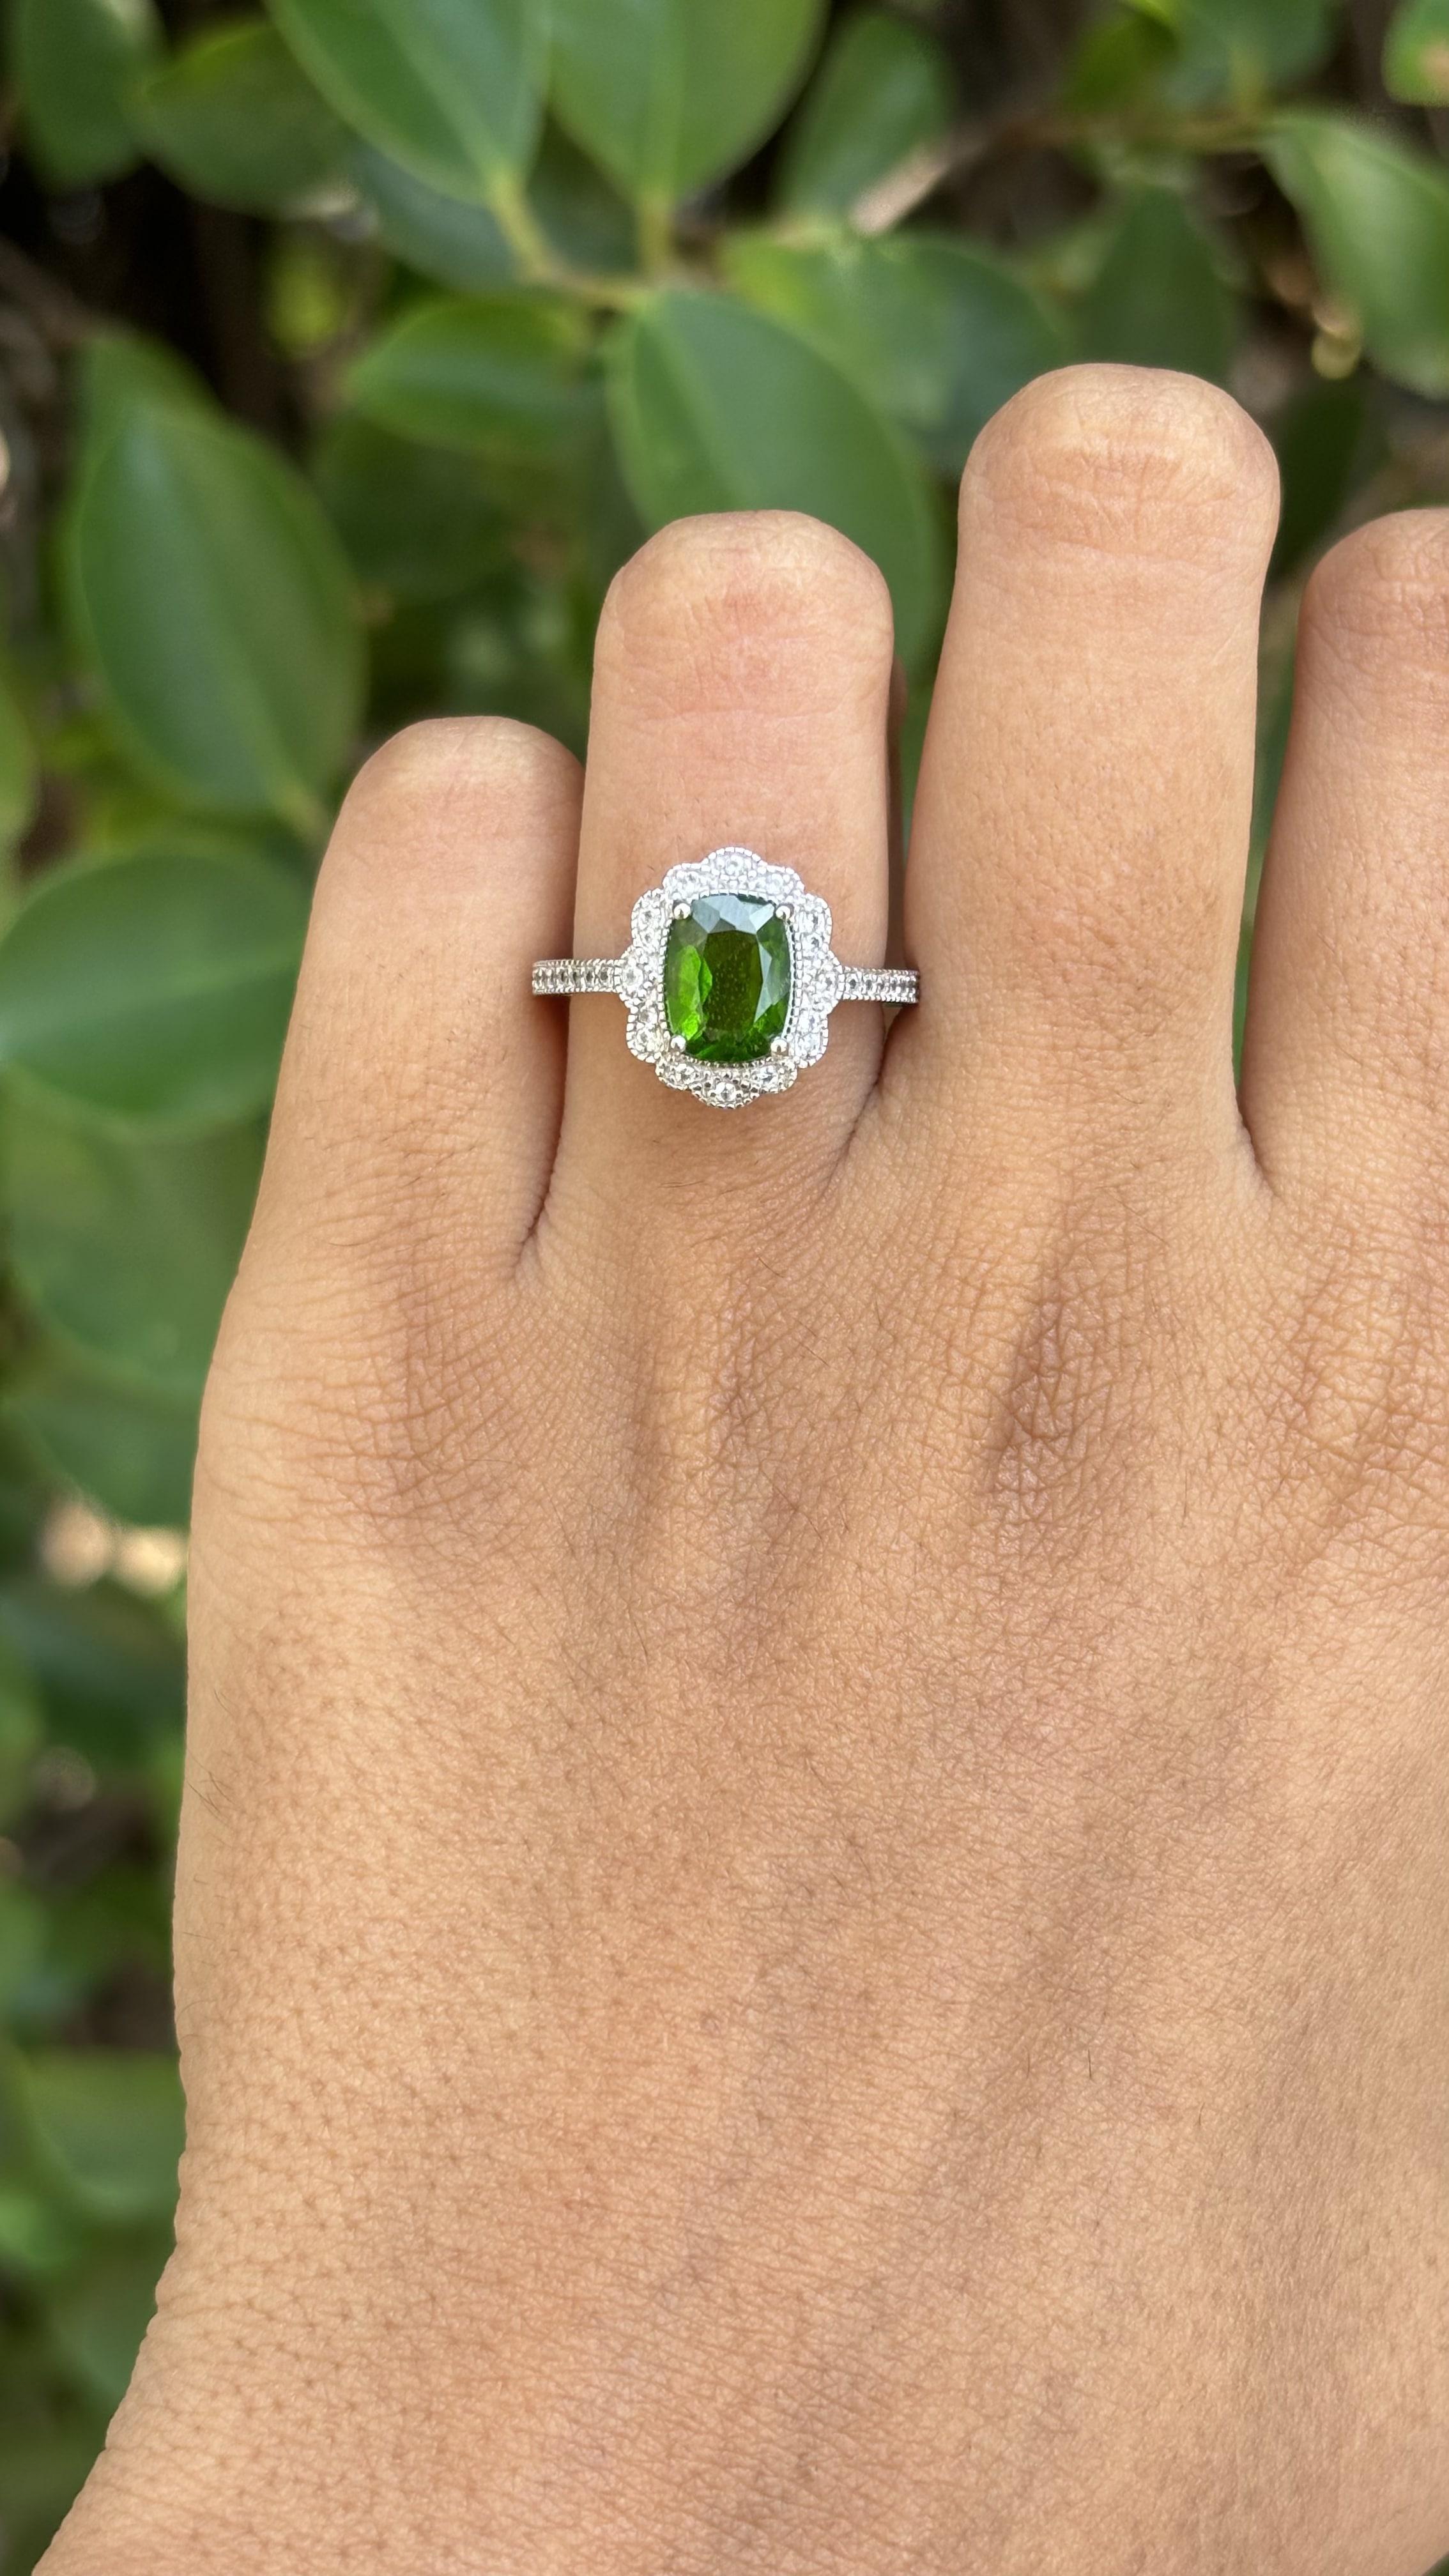 Antique circa 1900s Diopside & CZ Ring in Silver 7